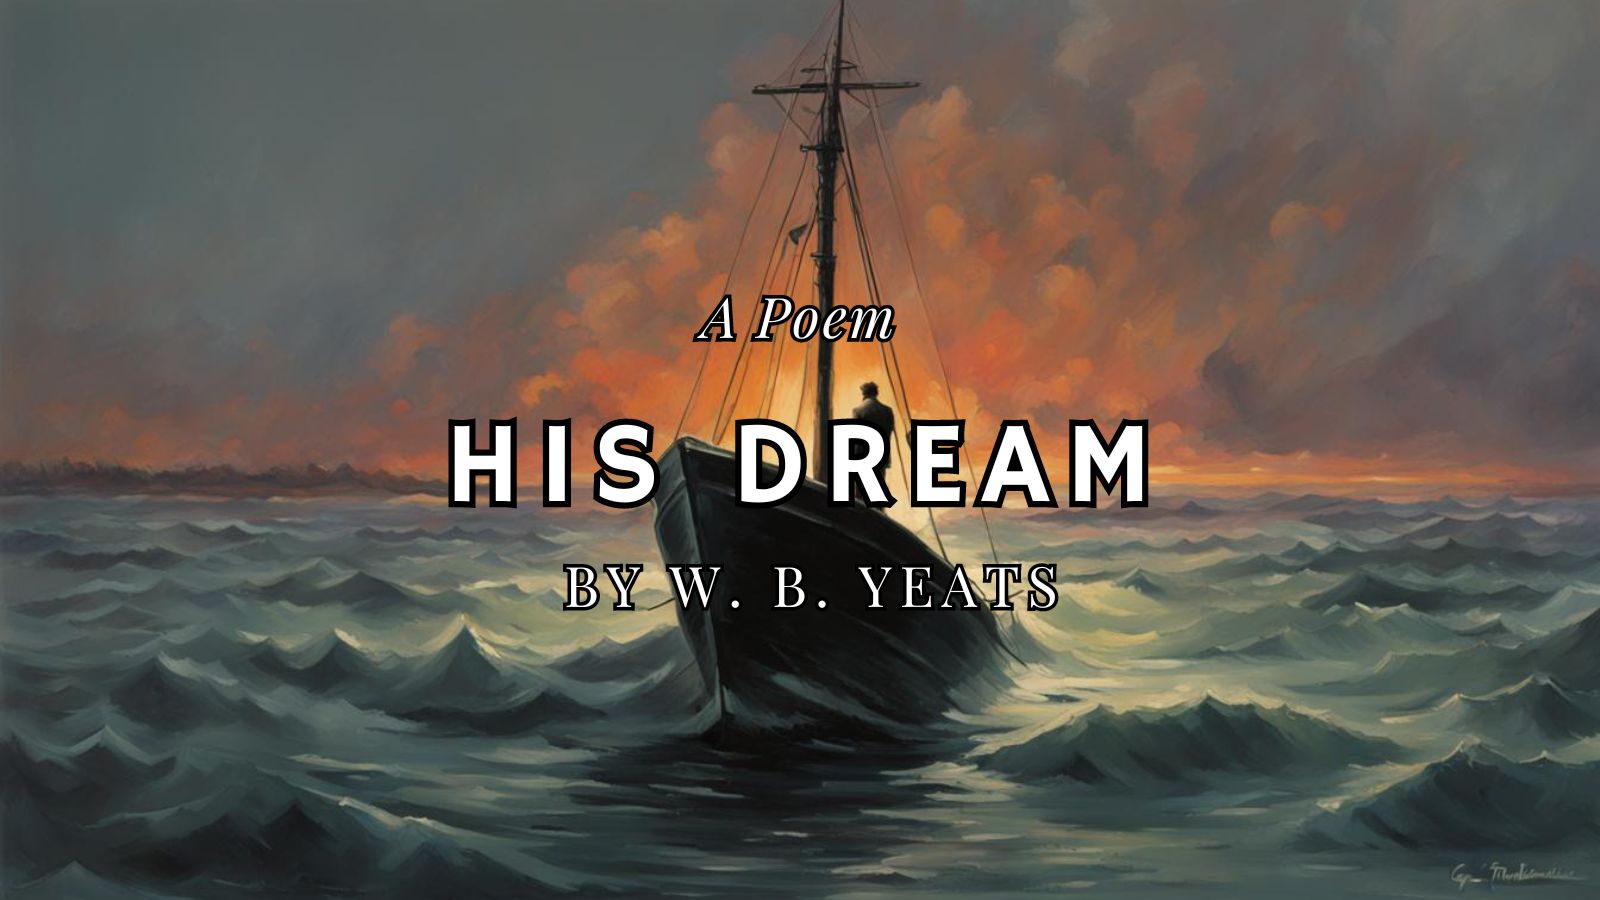 His Dream by W. B. Yeats